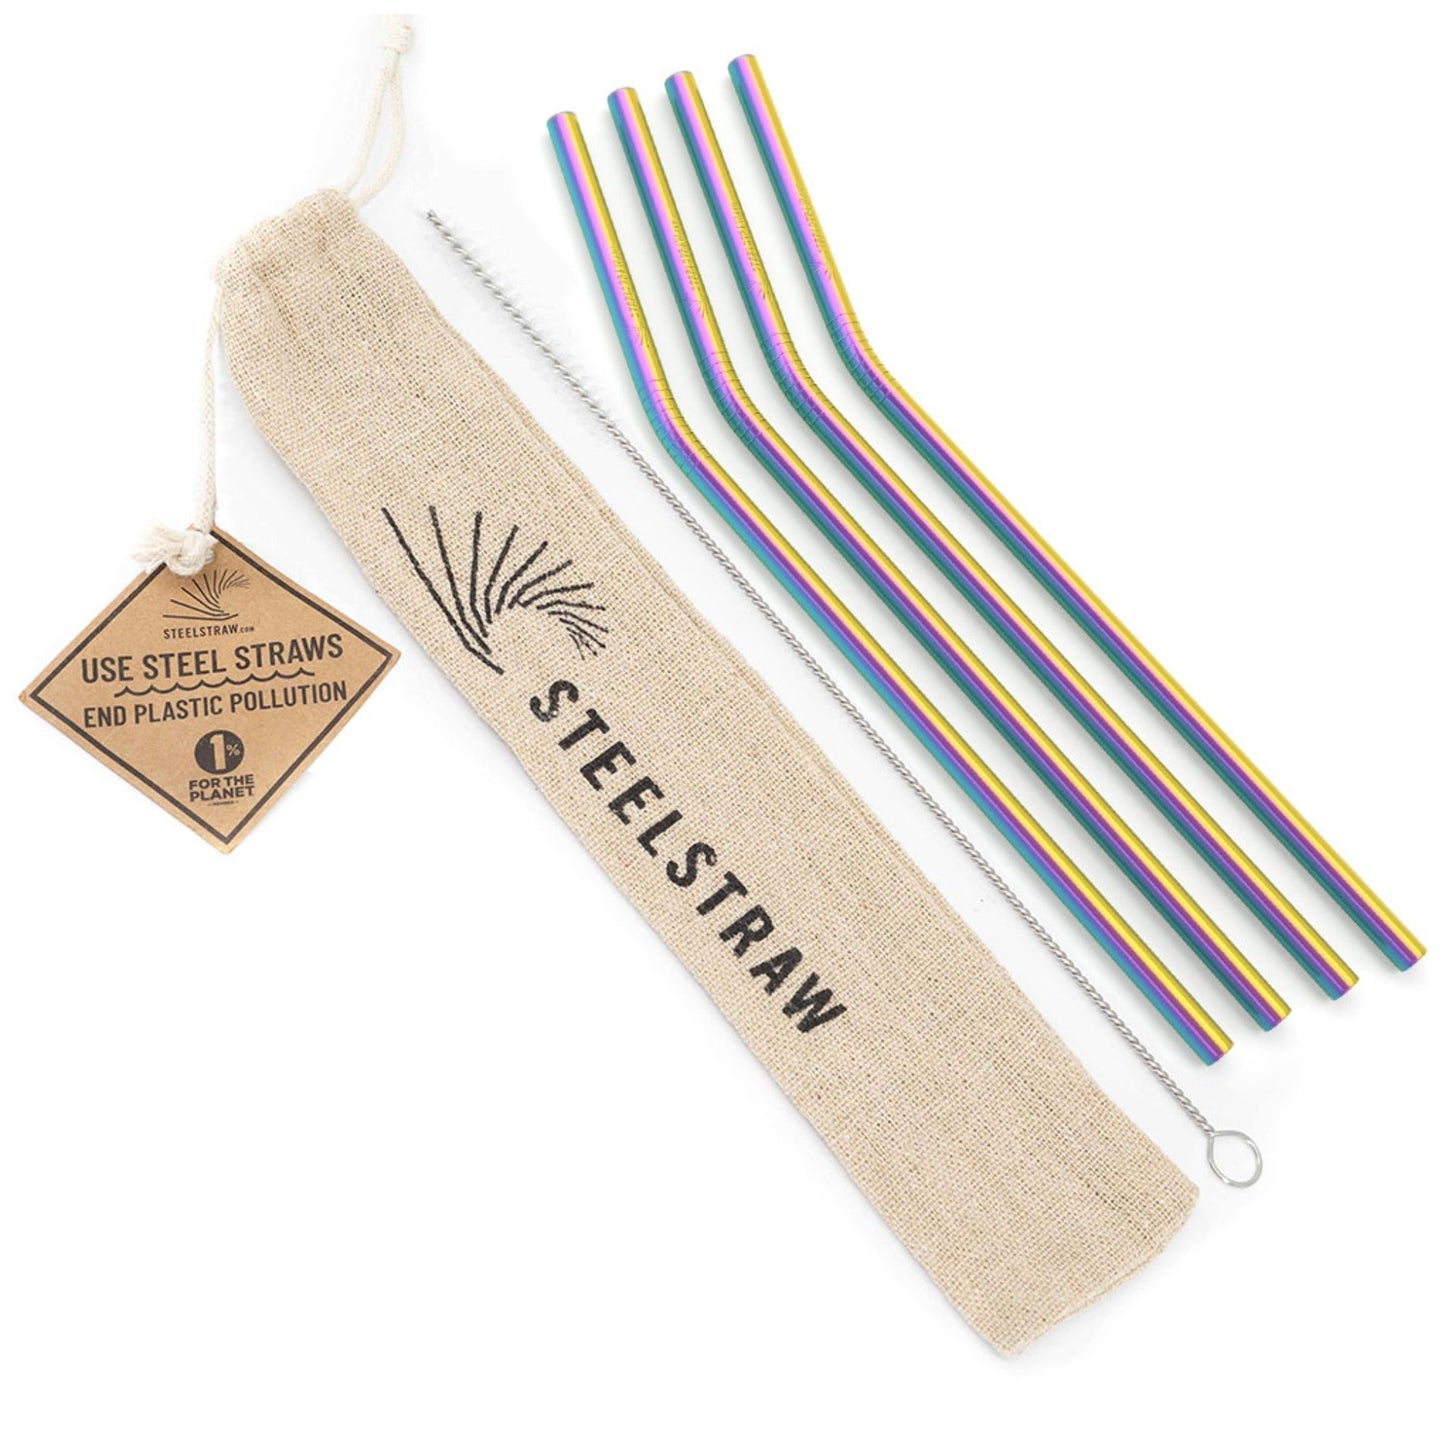 Curved Reusable Straw Gift Sets-10